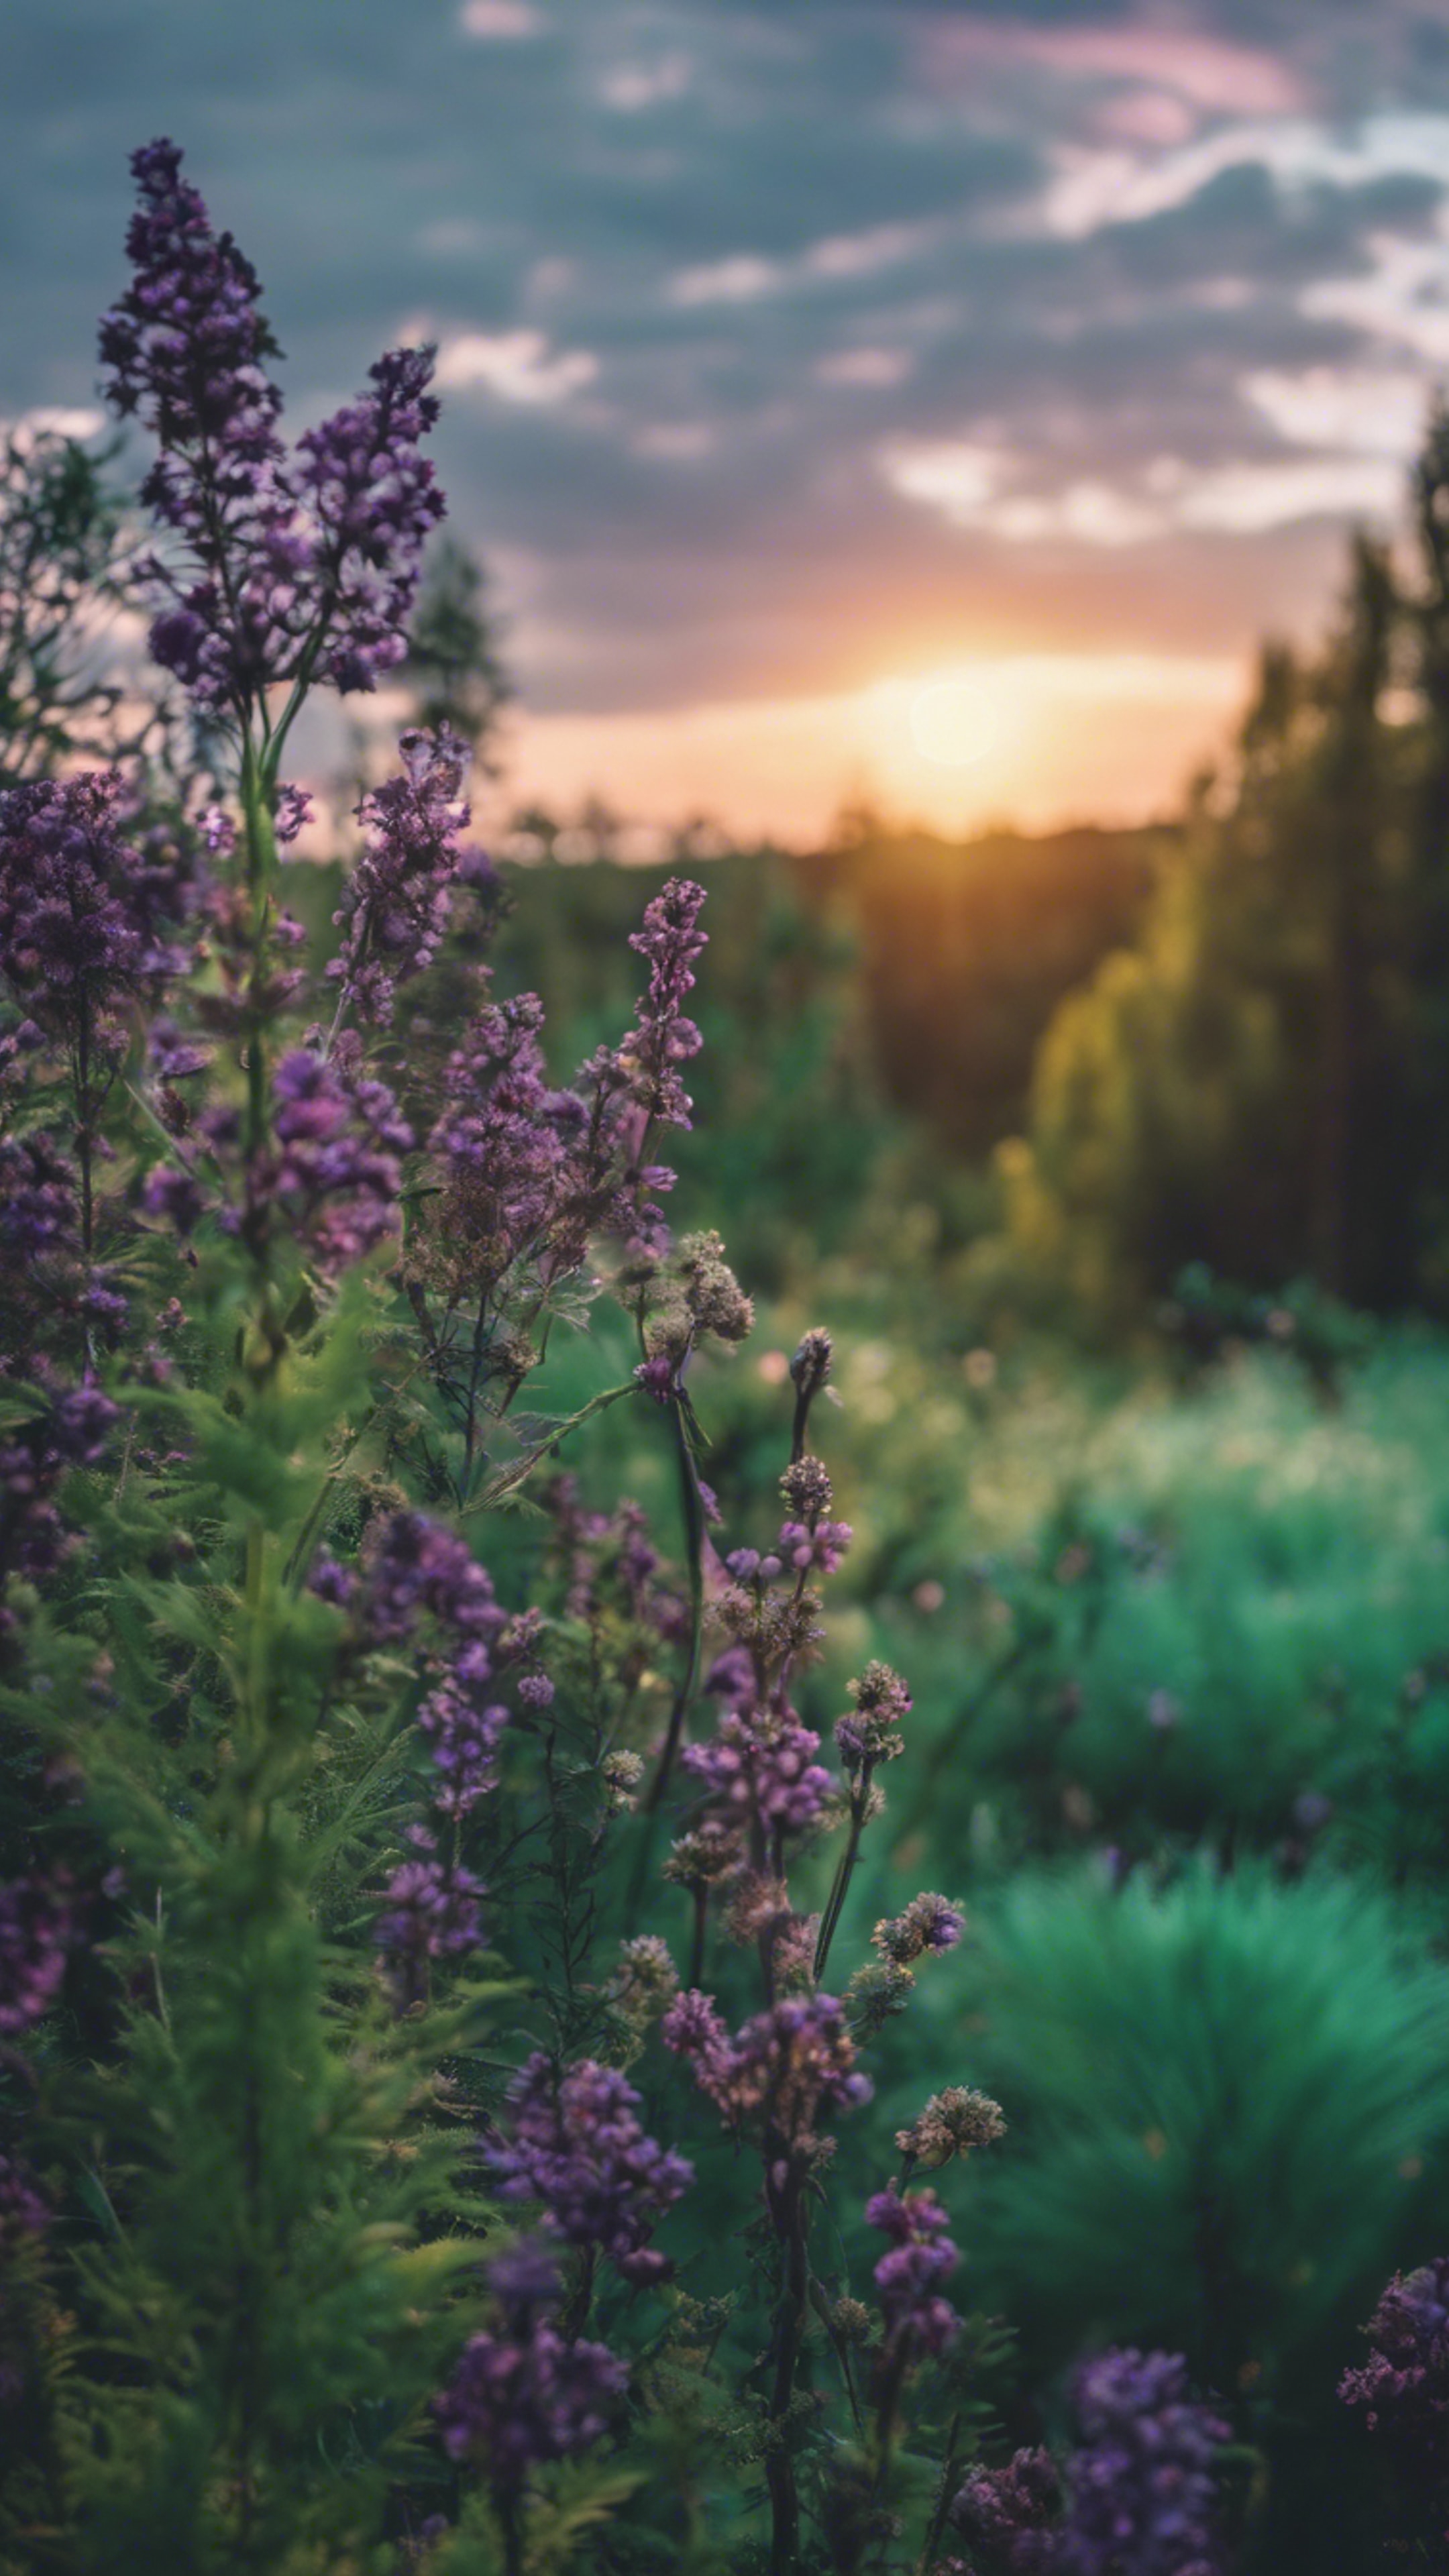 A malachite green forest with patches of black and purple wildflowers under the setting sun.壁紙[da22d74044274e43bbbd]